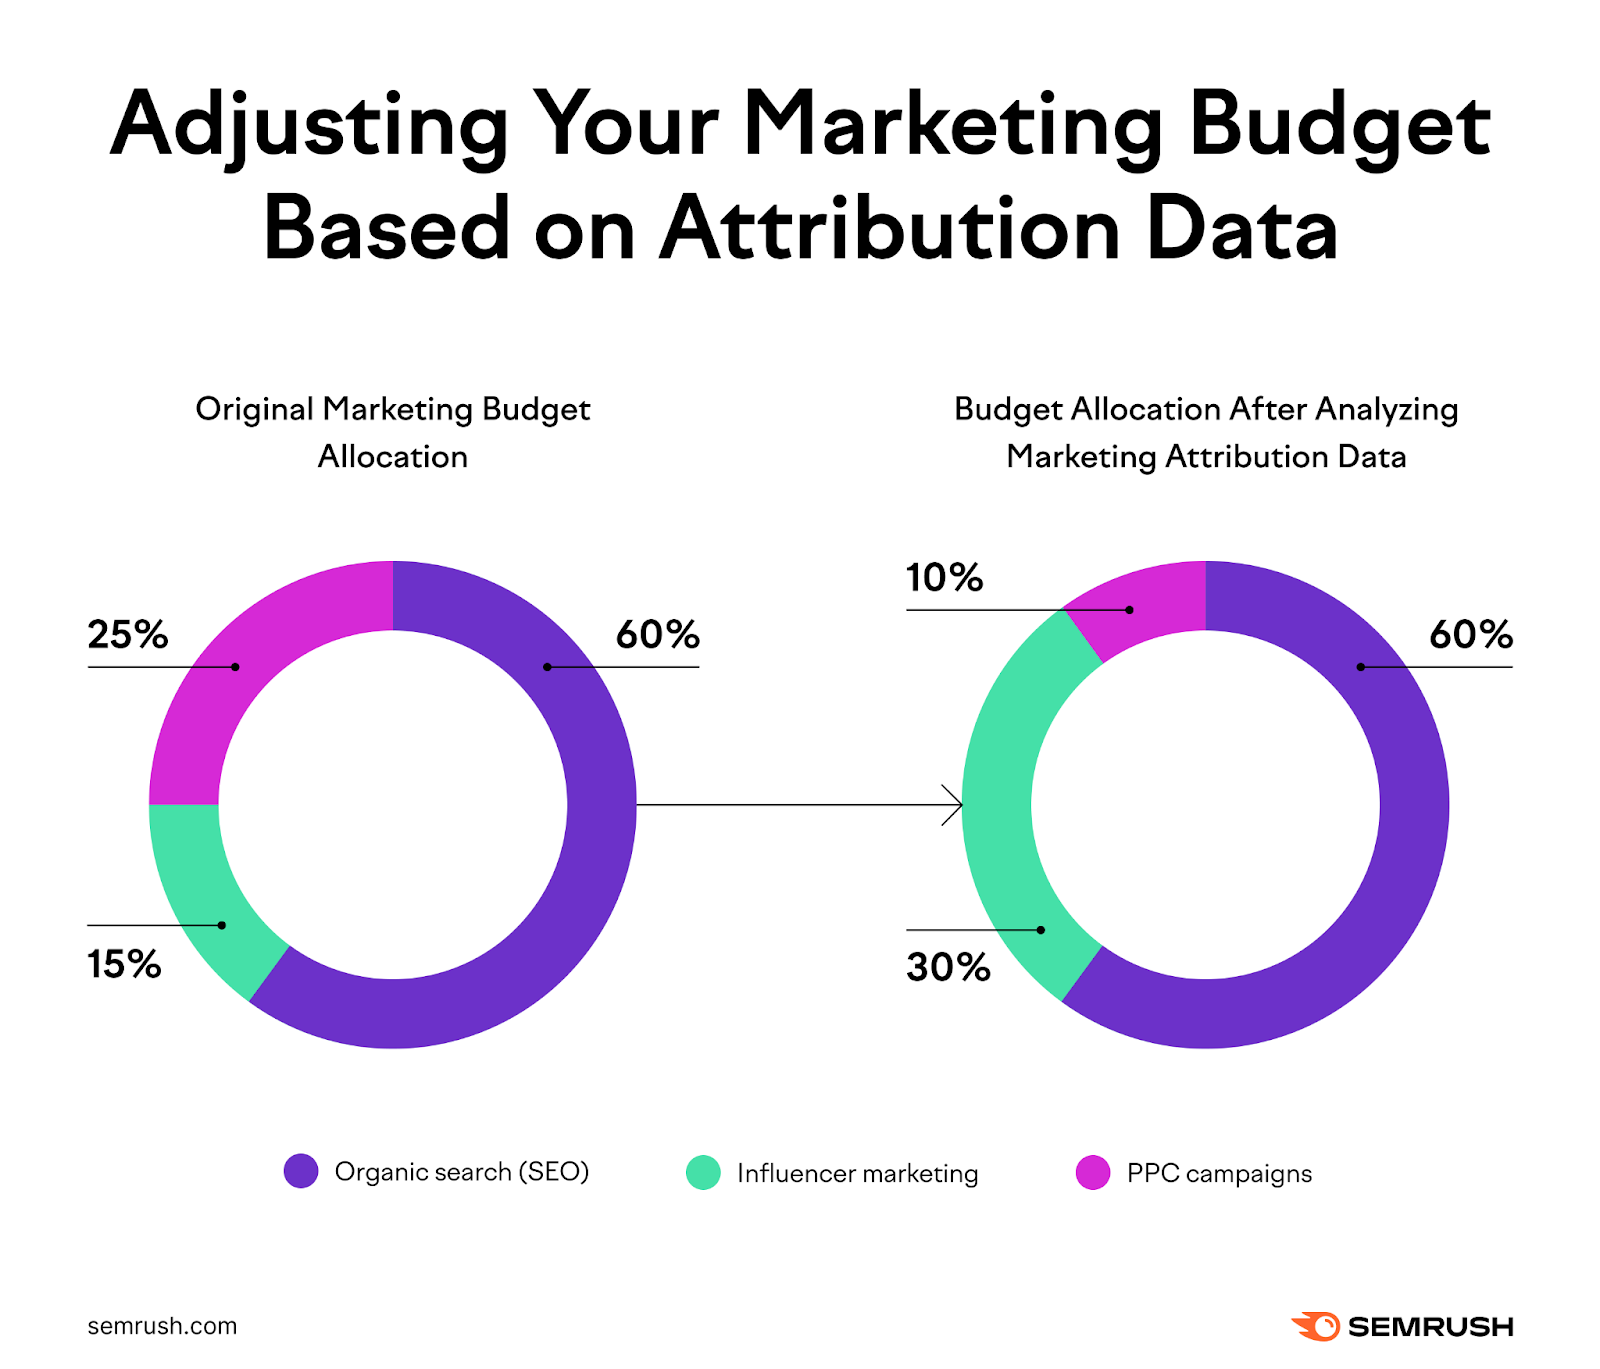 Visualization of a change in marketing budget allocation due to influencer marketing outperforming PPC campaigns, based on marketing attribution data.